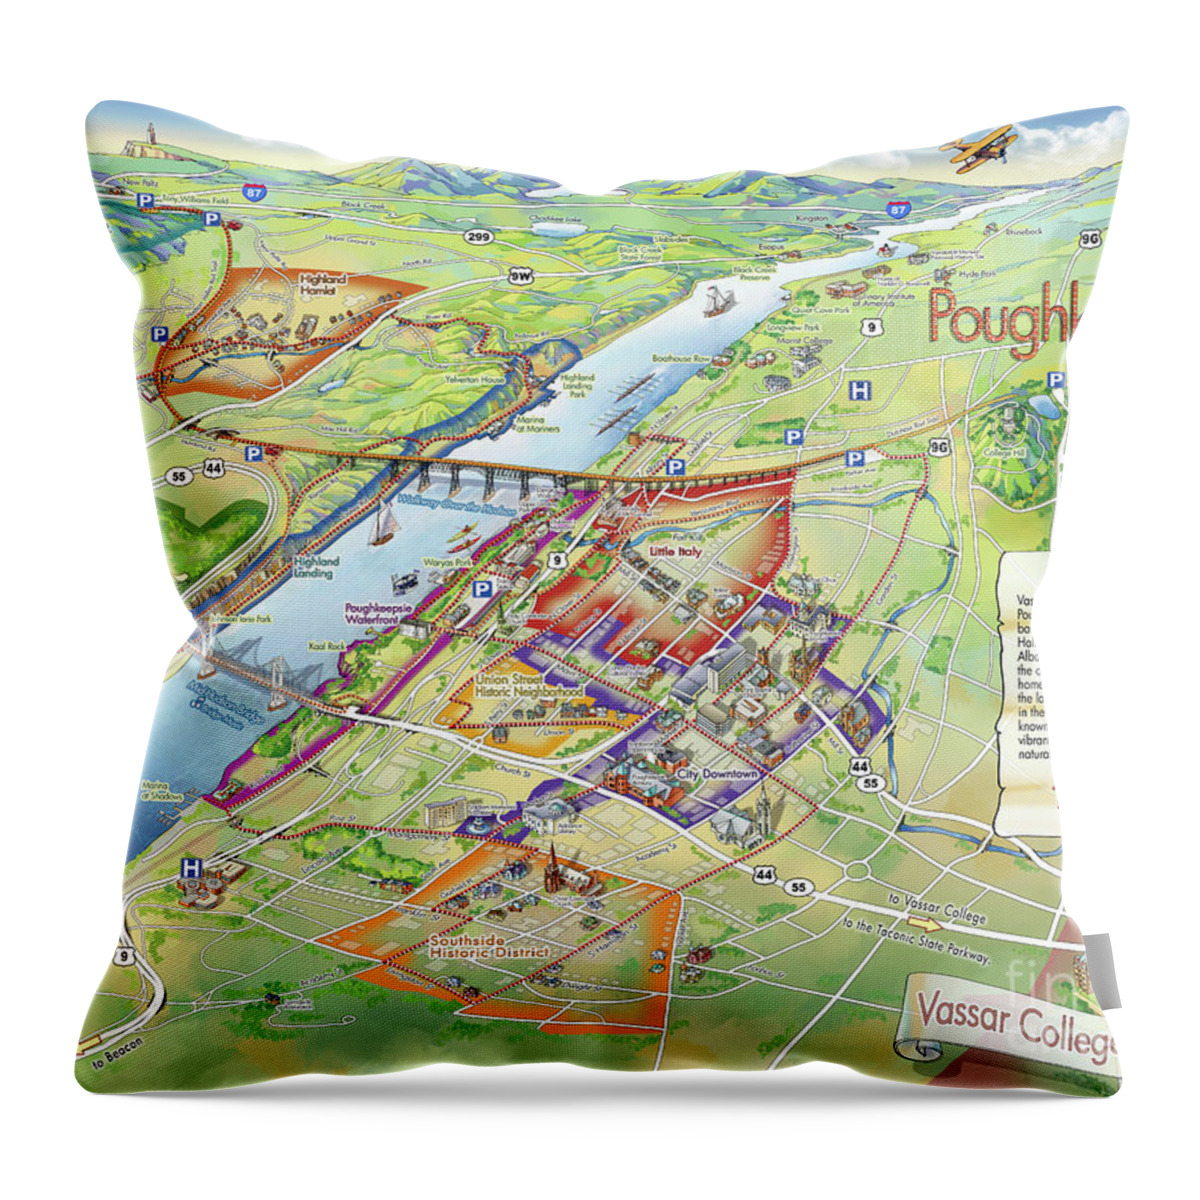 Vassar College Throw Pillow featuring the digital art Poughkeepsie and Vassar College Illustrated Map by Maria Rabinky